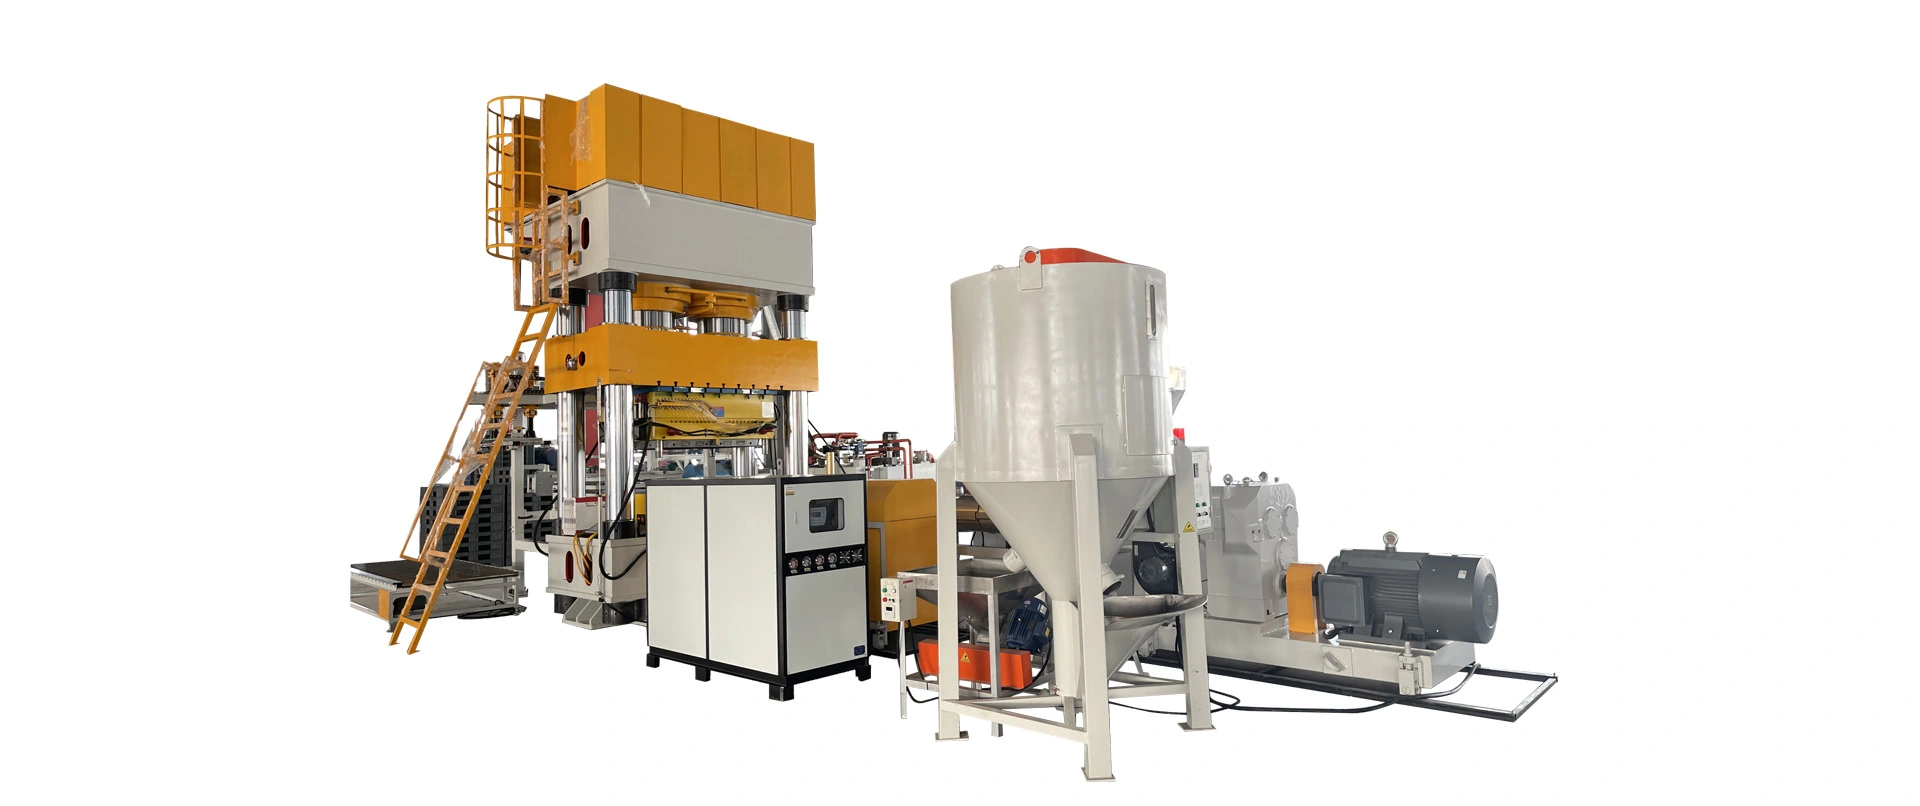 Waste textile recycling equipment